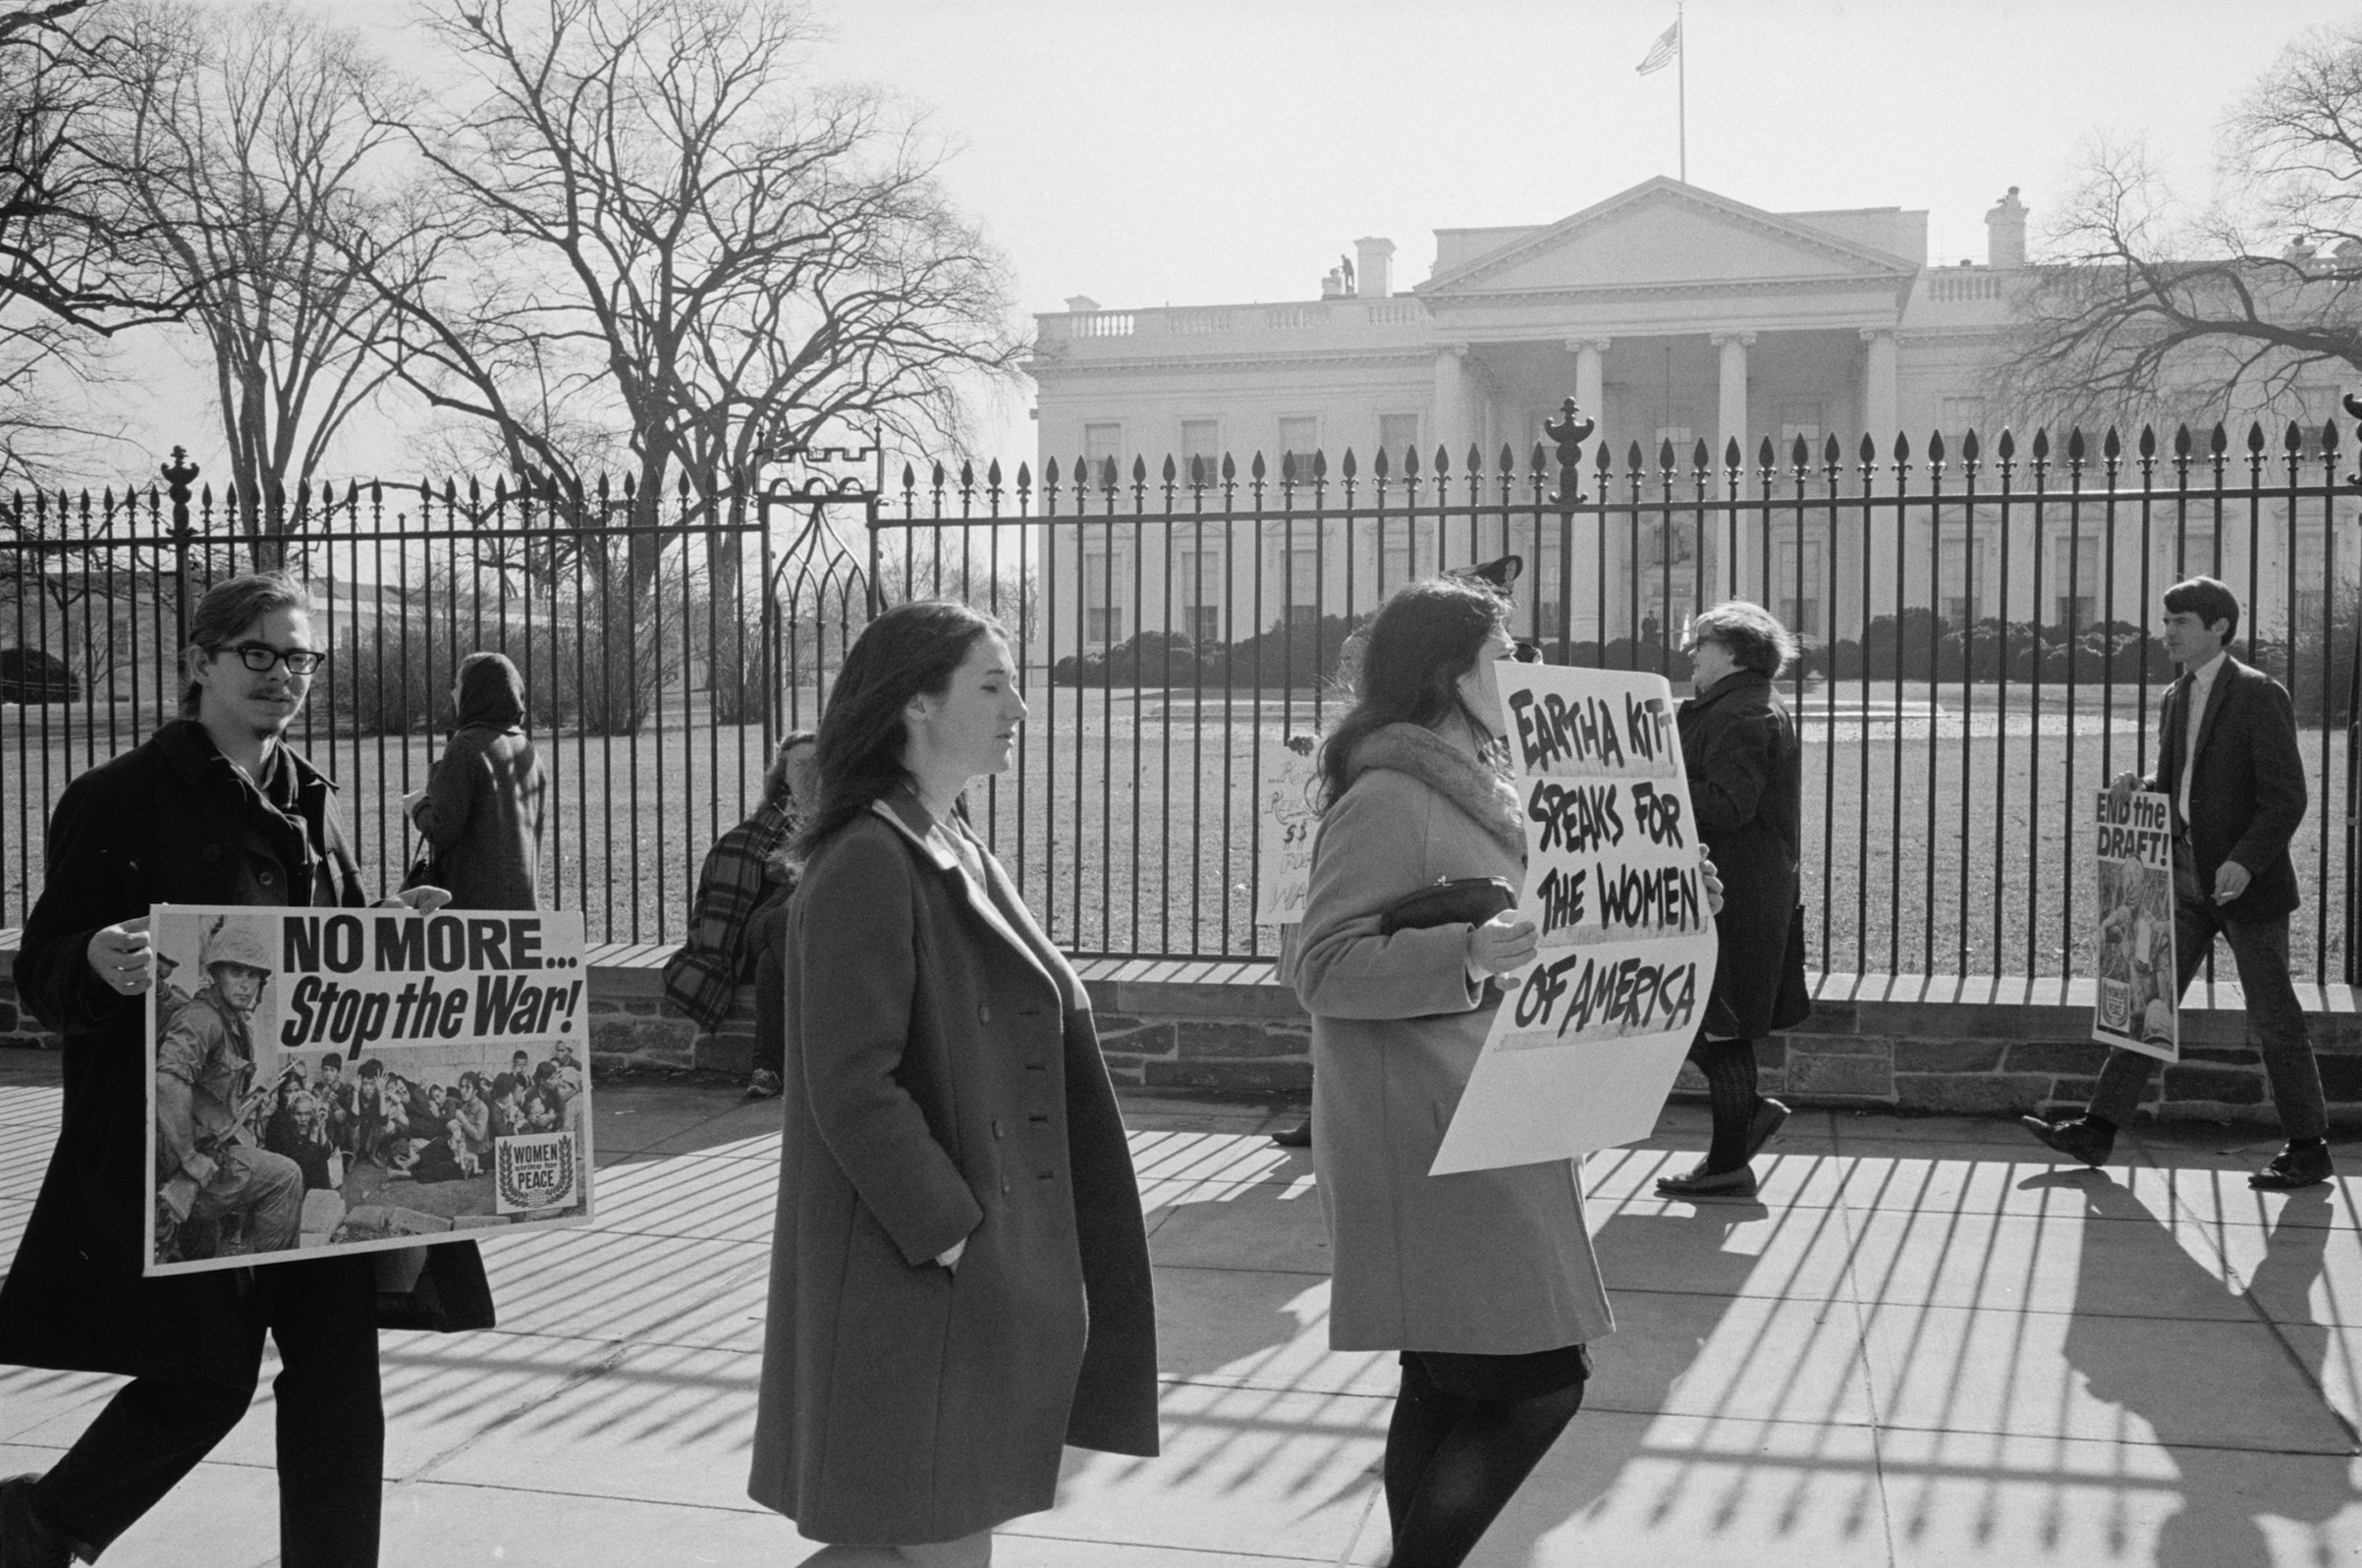 Anti-war demonstrators picketing in front of the White House on Jan. 19, 1968. (PhotoQuest / Getty Images)